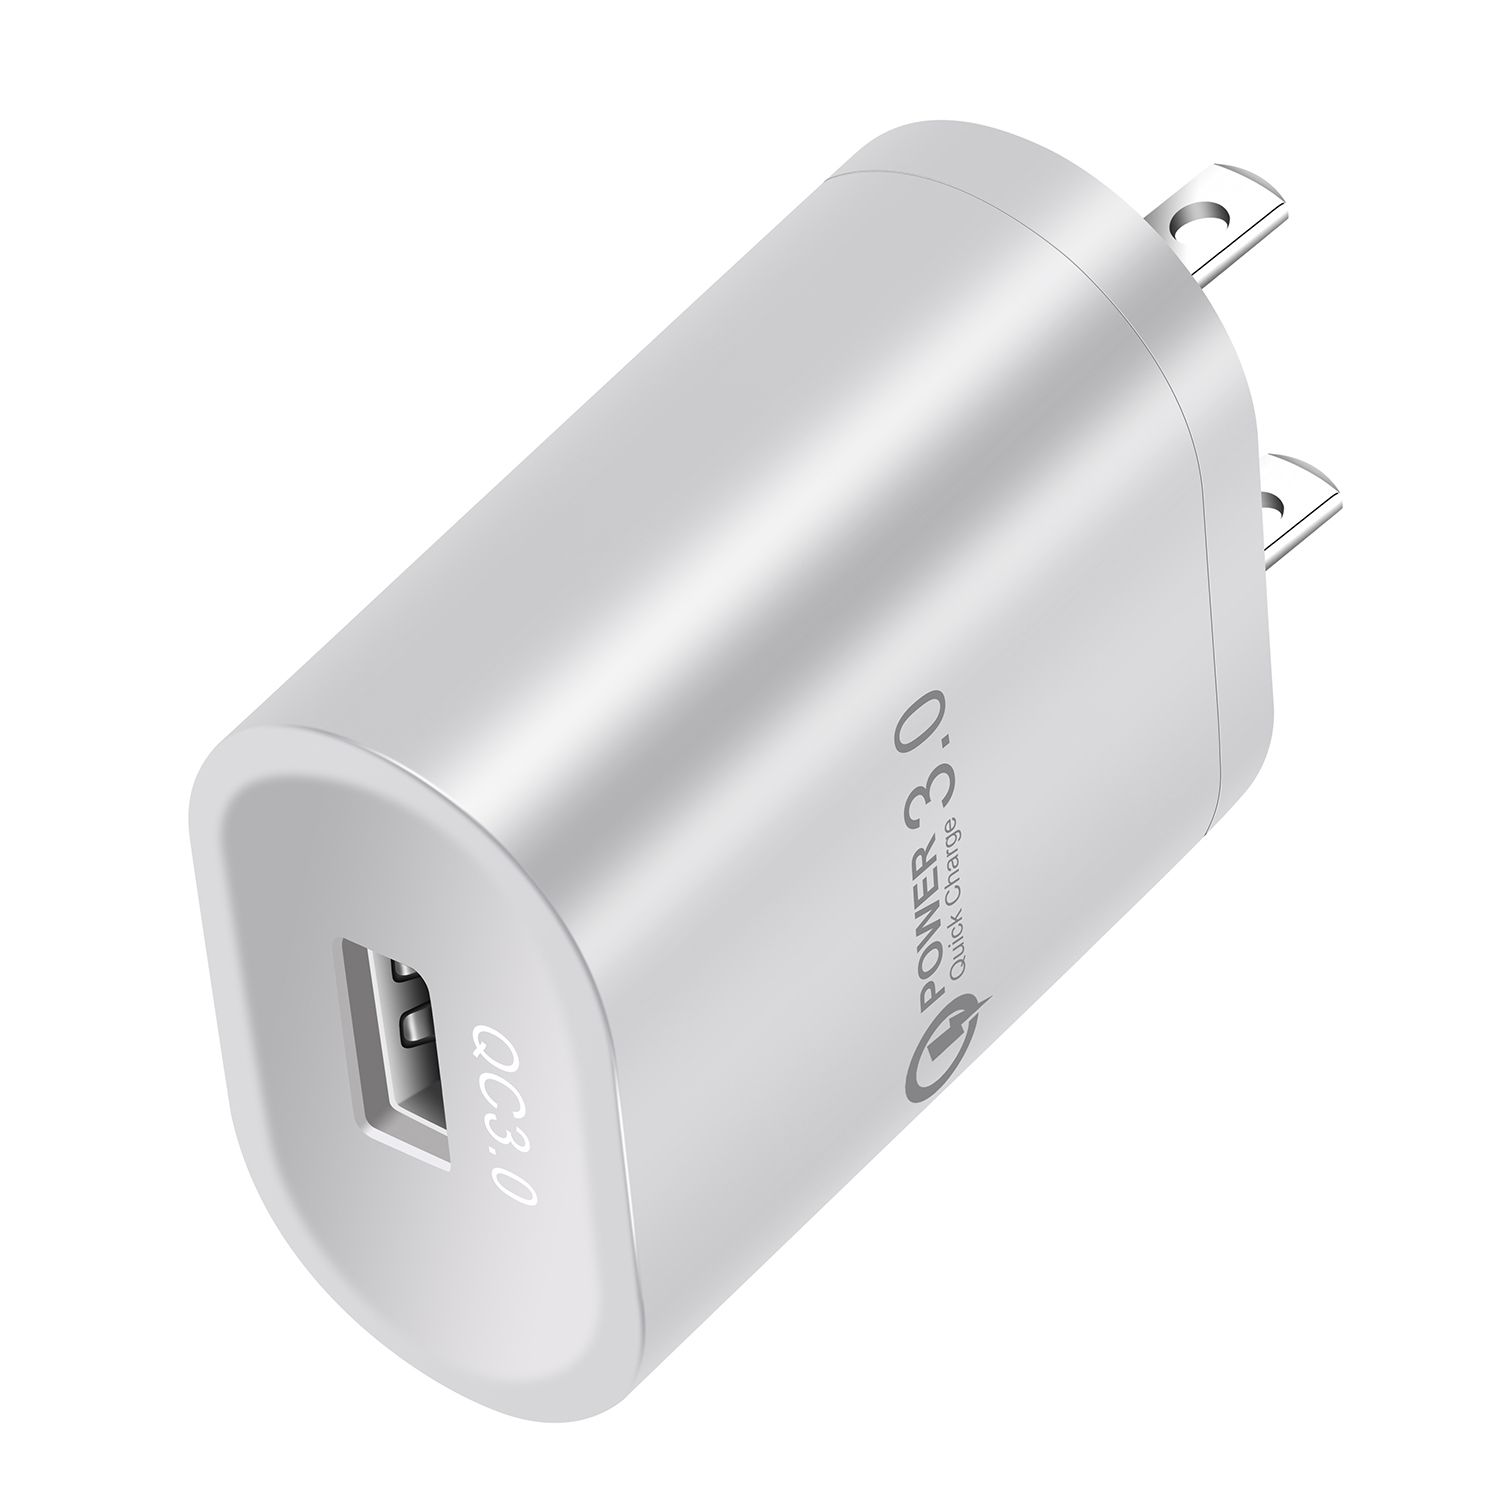 Bakeey-36W-QC30-Single-USB-Fast-Charging-USB-Charger-Adapter-For-iPhone-XS-11-Pro-Huawei-P30-Pro-Mat-1601485